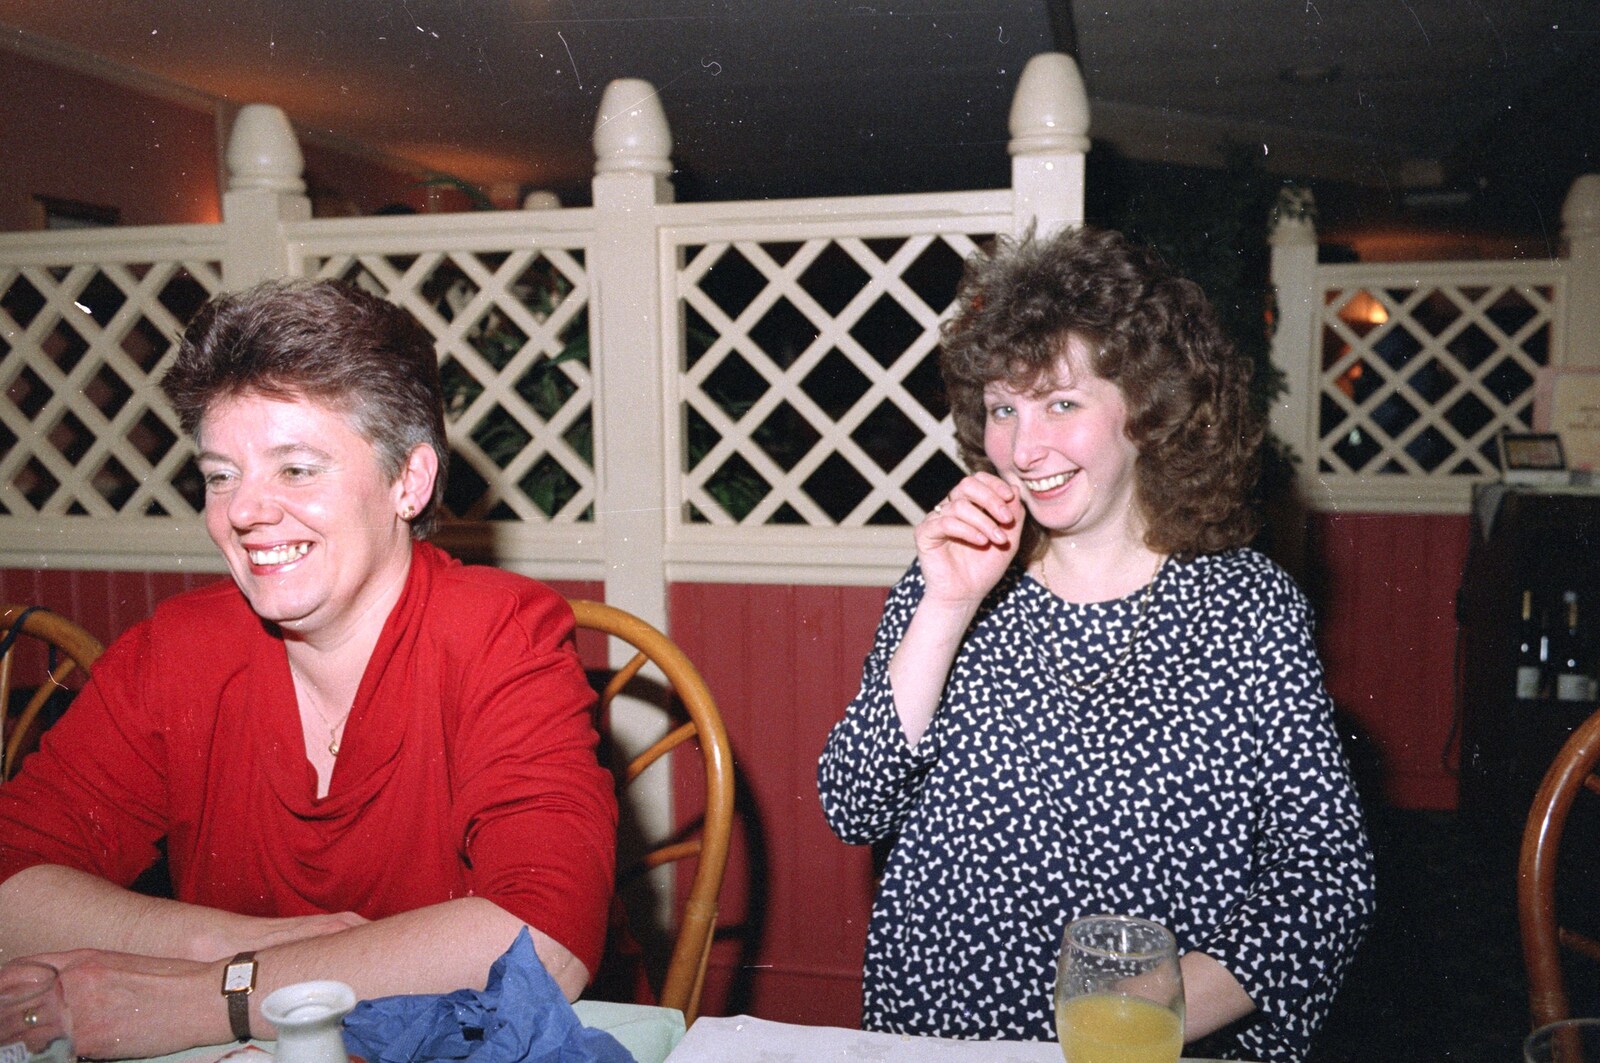 Alison has a giggle from Printec at the Park Hotel, Diss, Norfolk - 14th January 1992